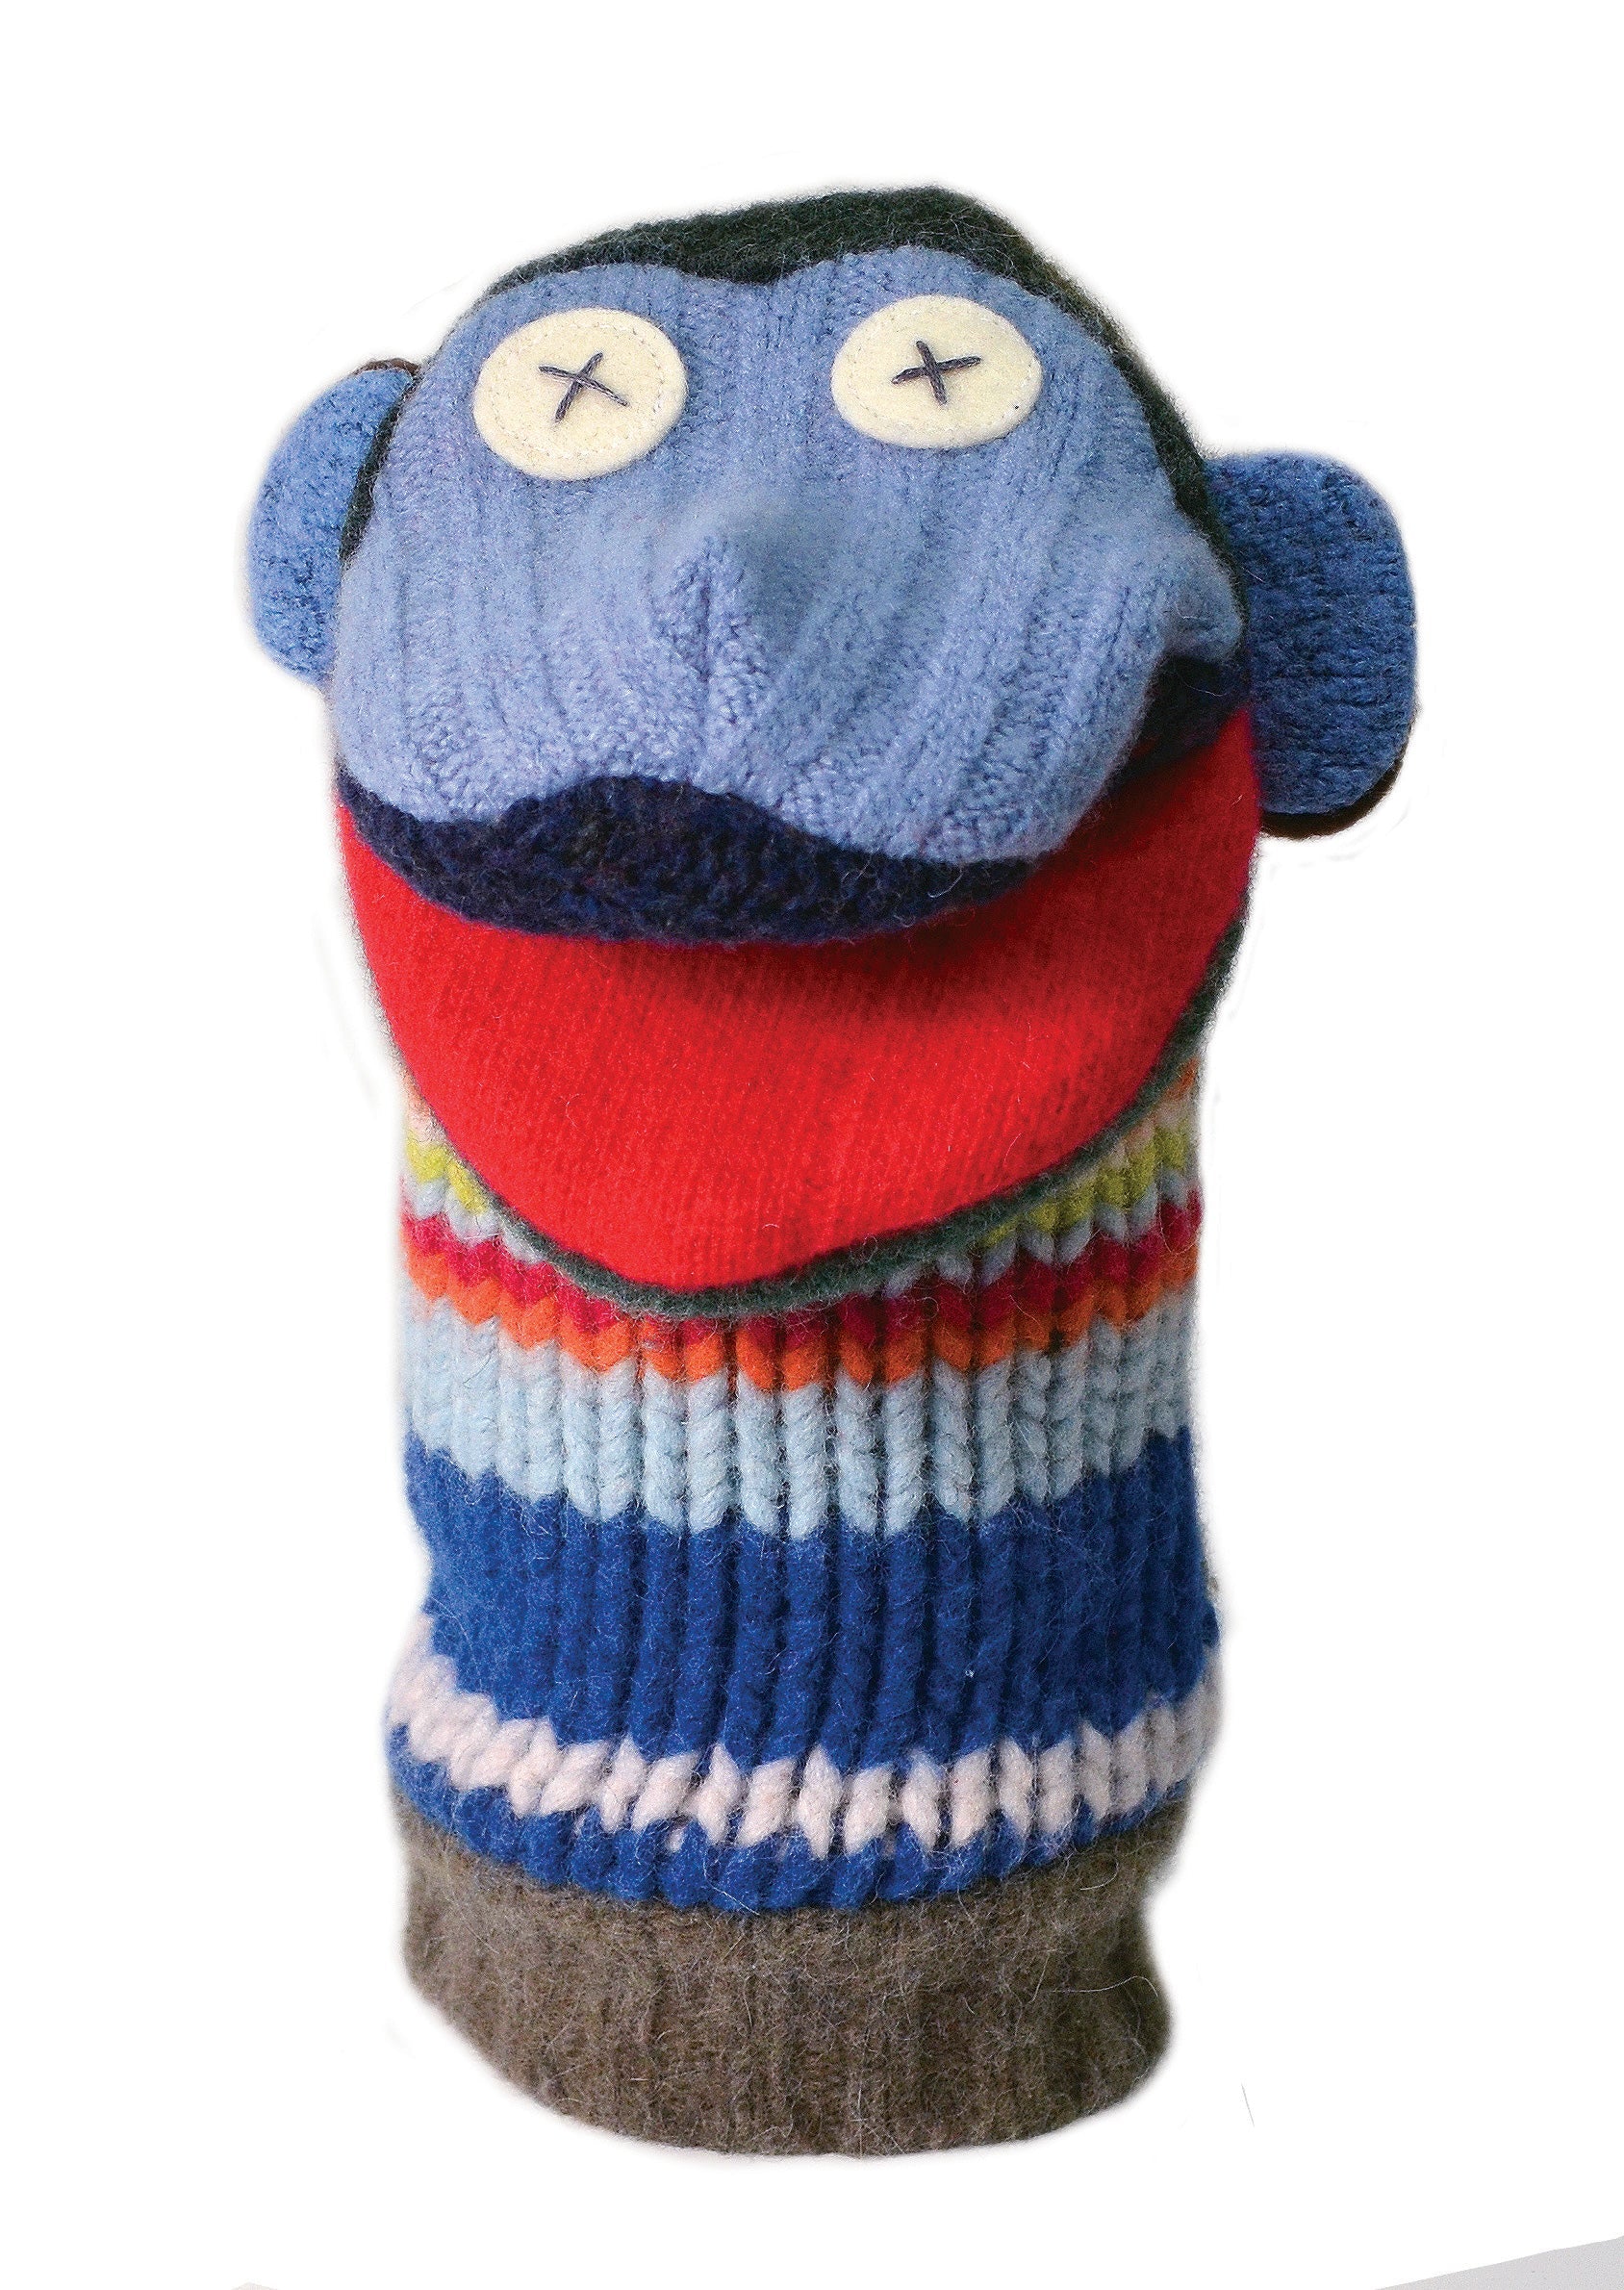 DIY Monkey Hand Puppet Kit from Reclaimed Wool